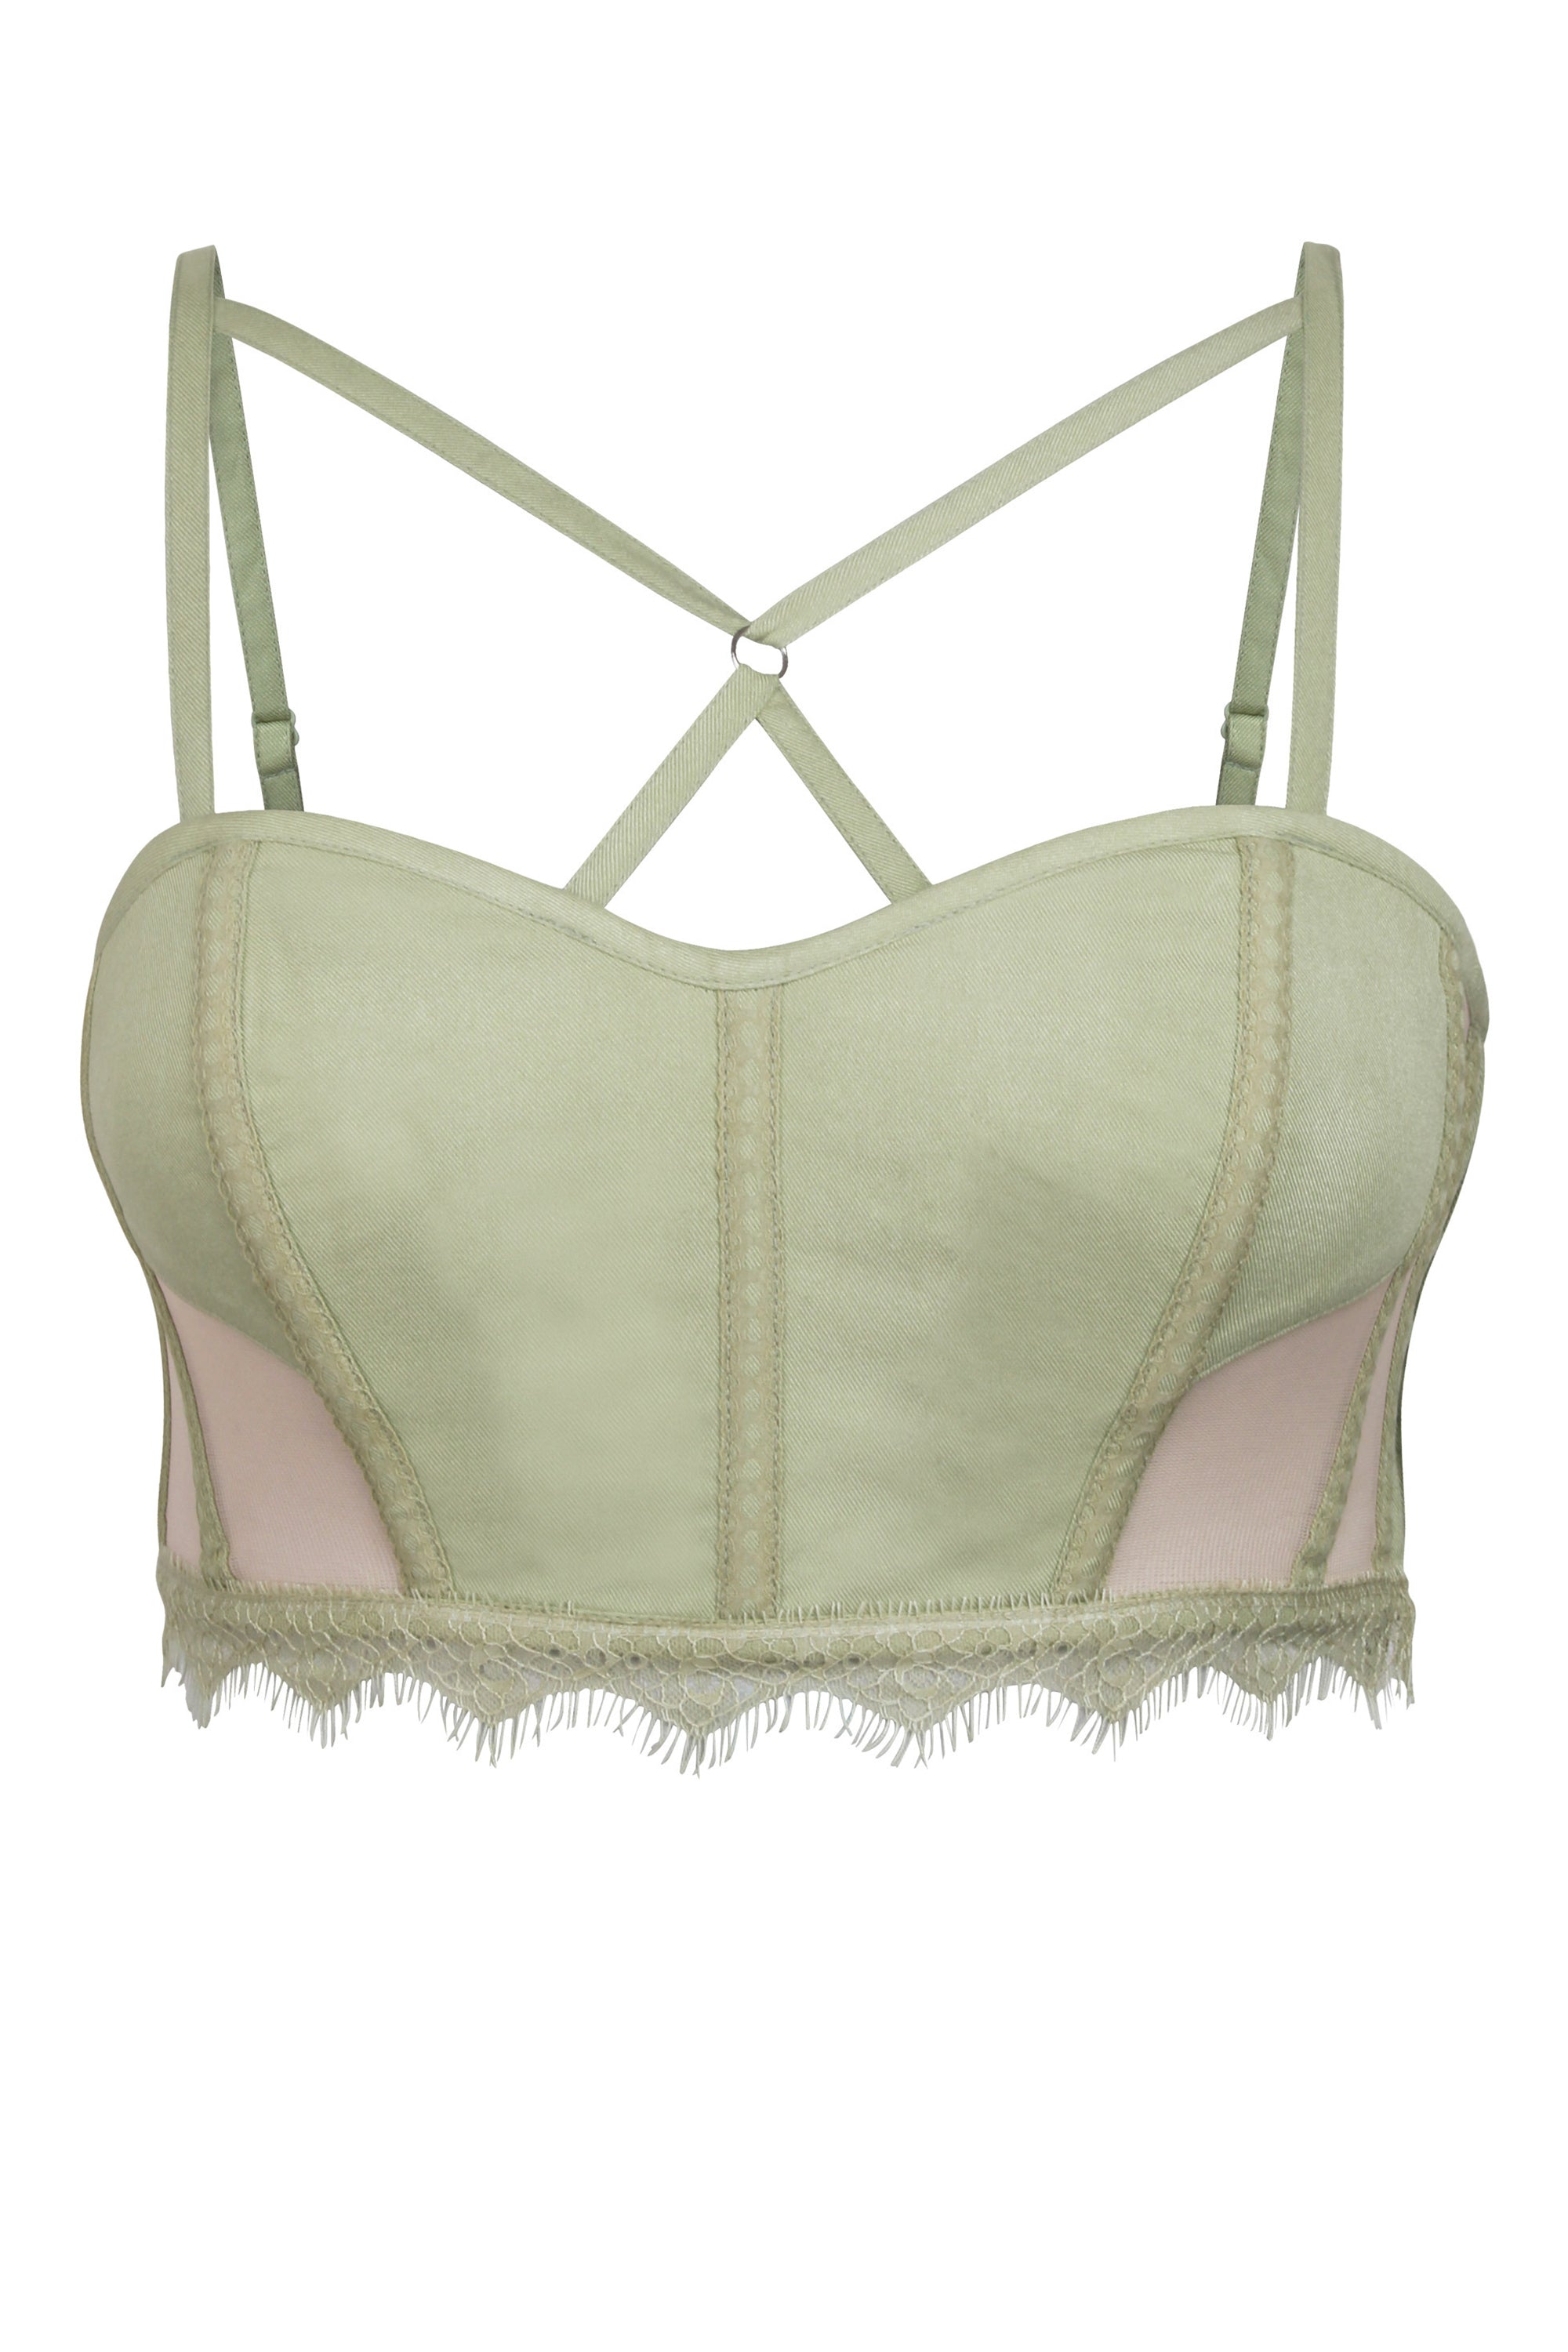 Lena Winter Pear Viscose and Lace Corseted Bralette with Strapping Det